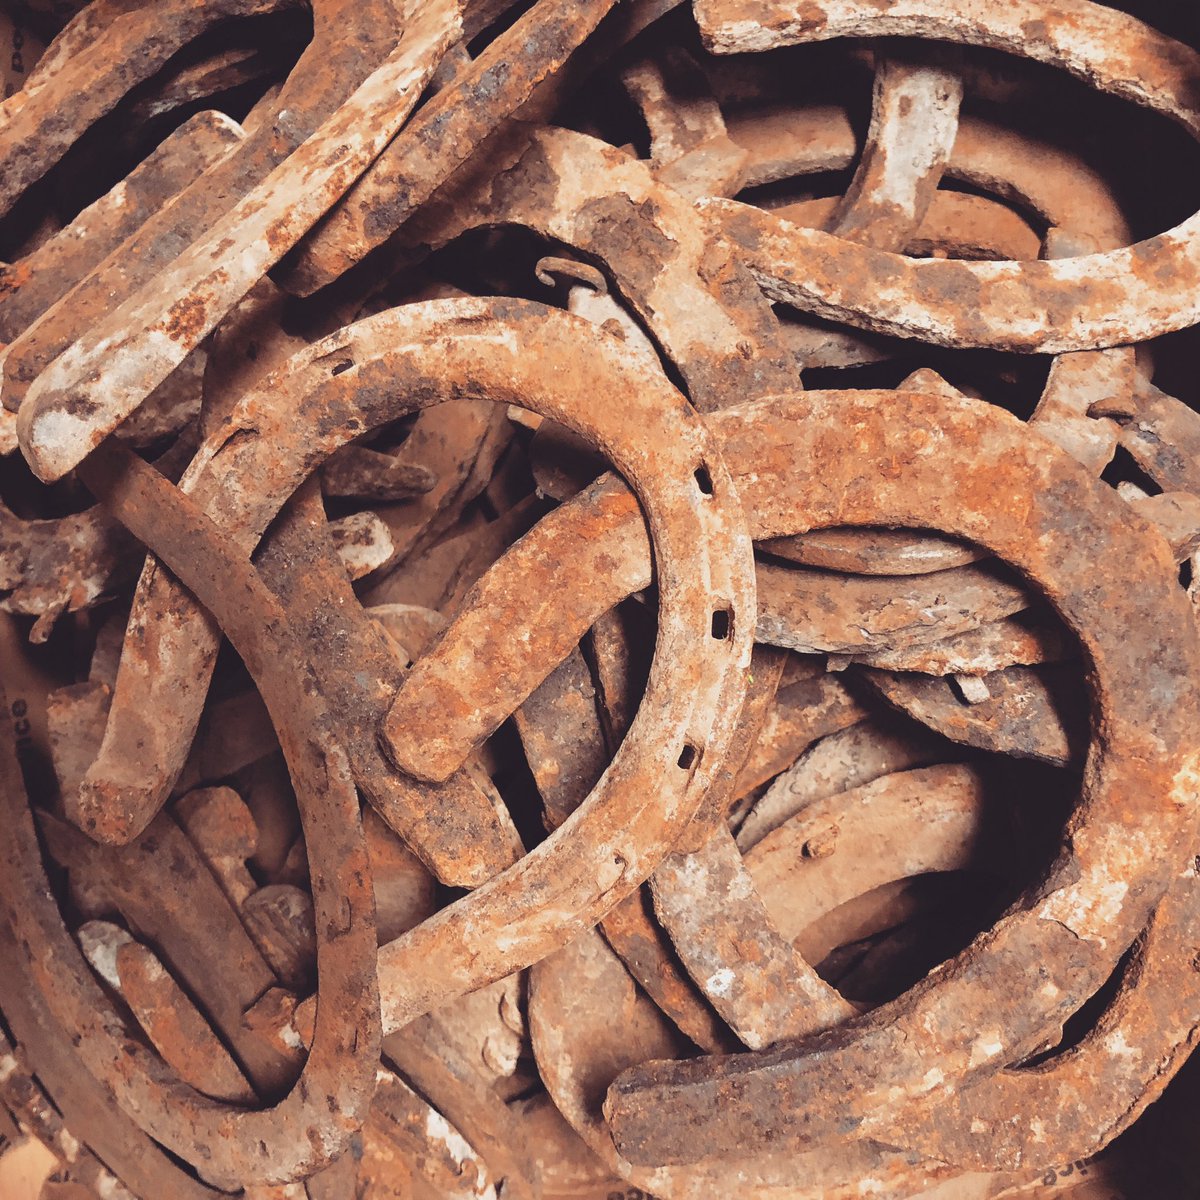 Yippee ki yay! Yes, I did indeed purchase a box lot of vintage horseshoes. Each one unique with a patina and story of its own. #vintagefinds #horseshoes #rusty #equine #walldisplay #doorknockers #horses #vintagehorseshoes #rustymetal #lakeviewgoods